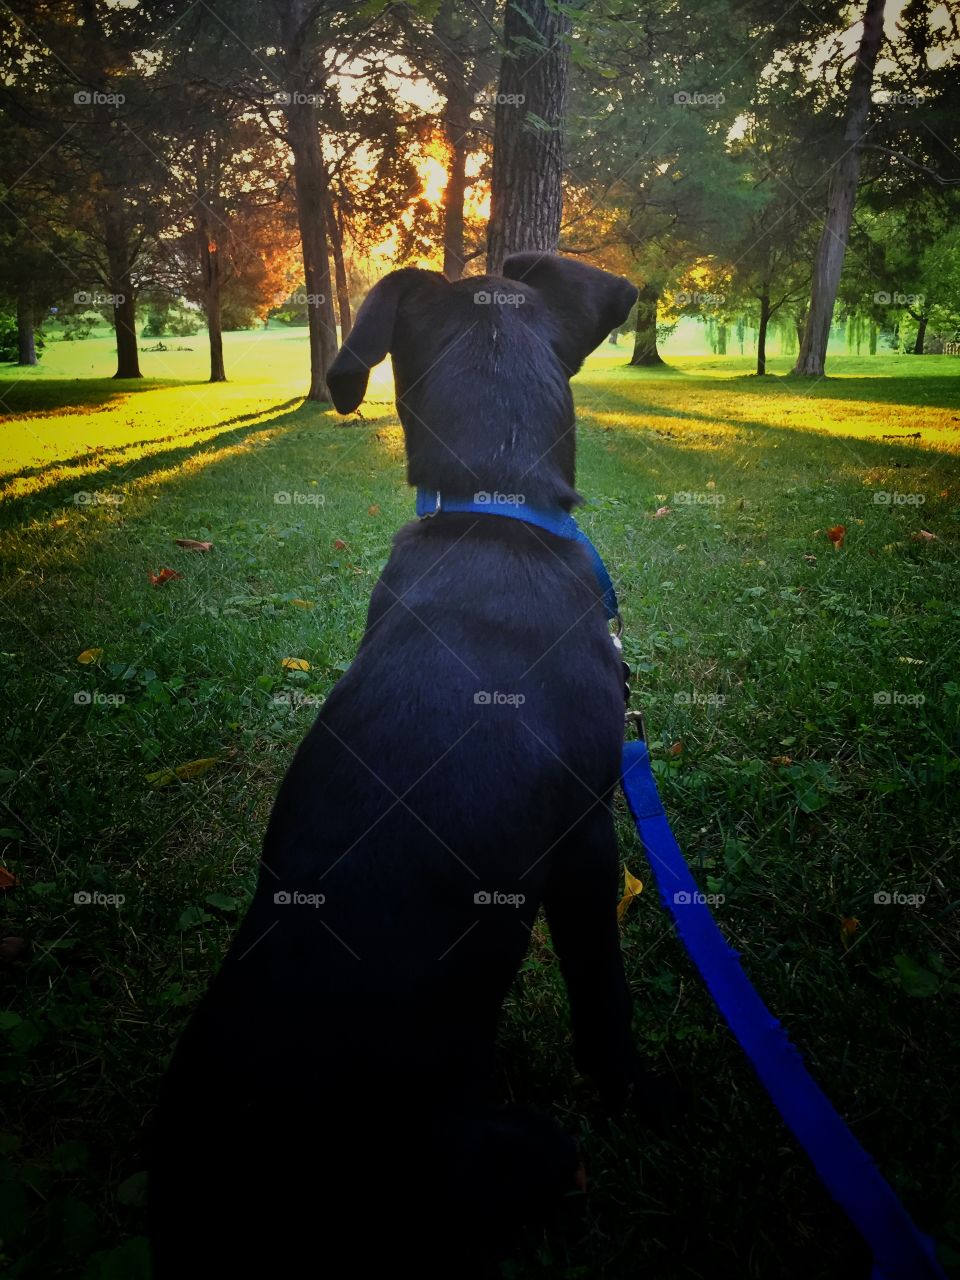 Beautiful park with a black dog watching the sunrise over lush green grass and tall trees in Washington DC 